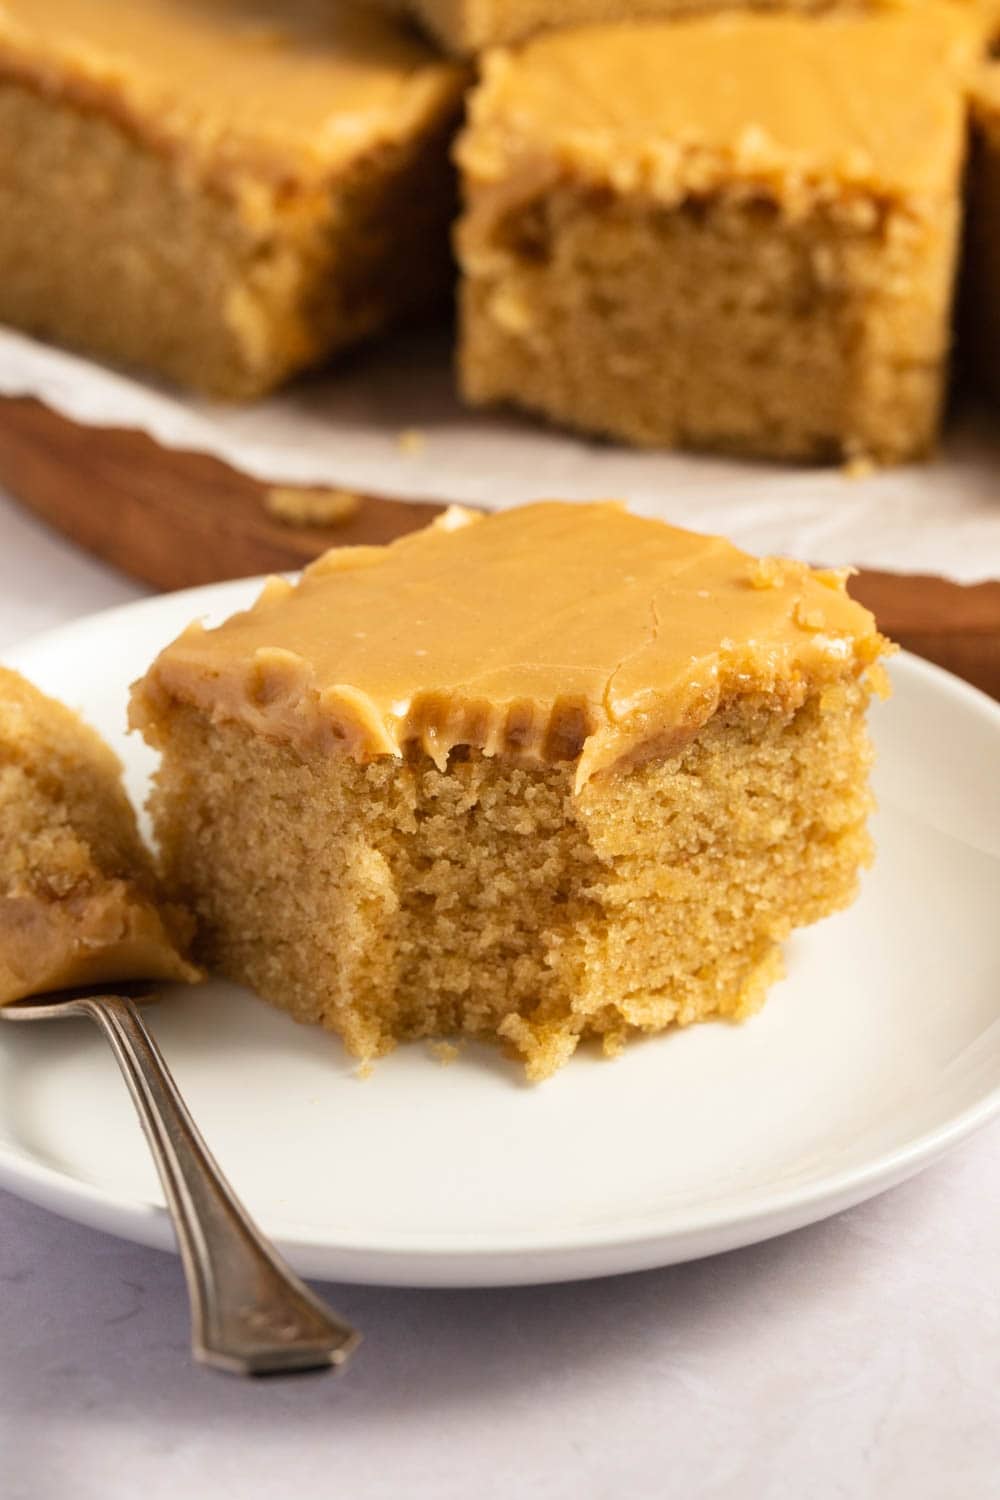 Sliced Sweet Peanut Butter Cake in a White Plate